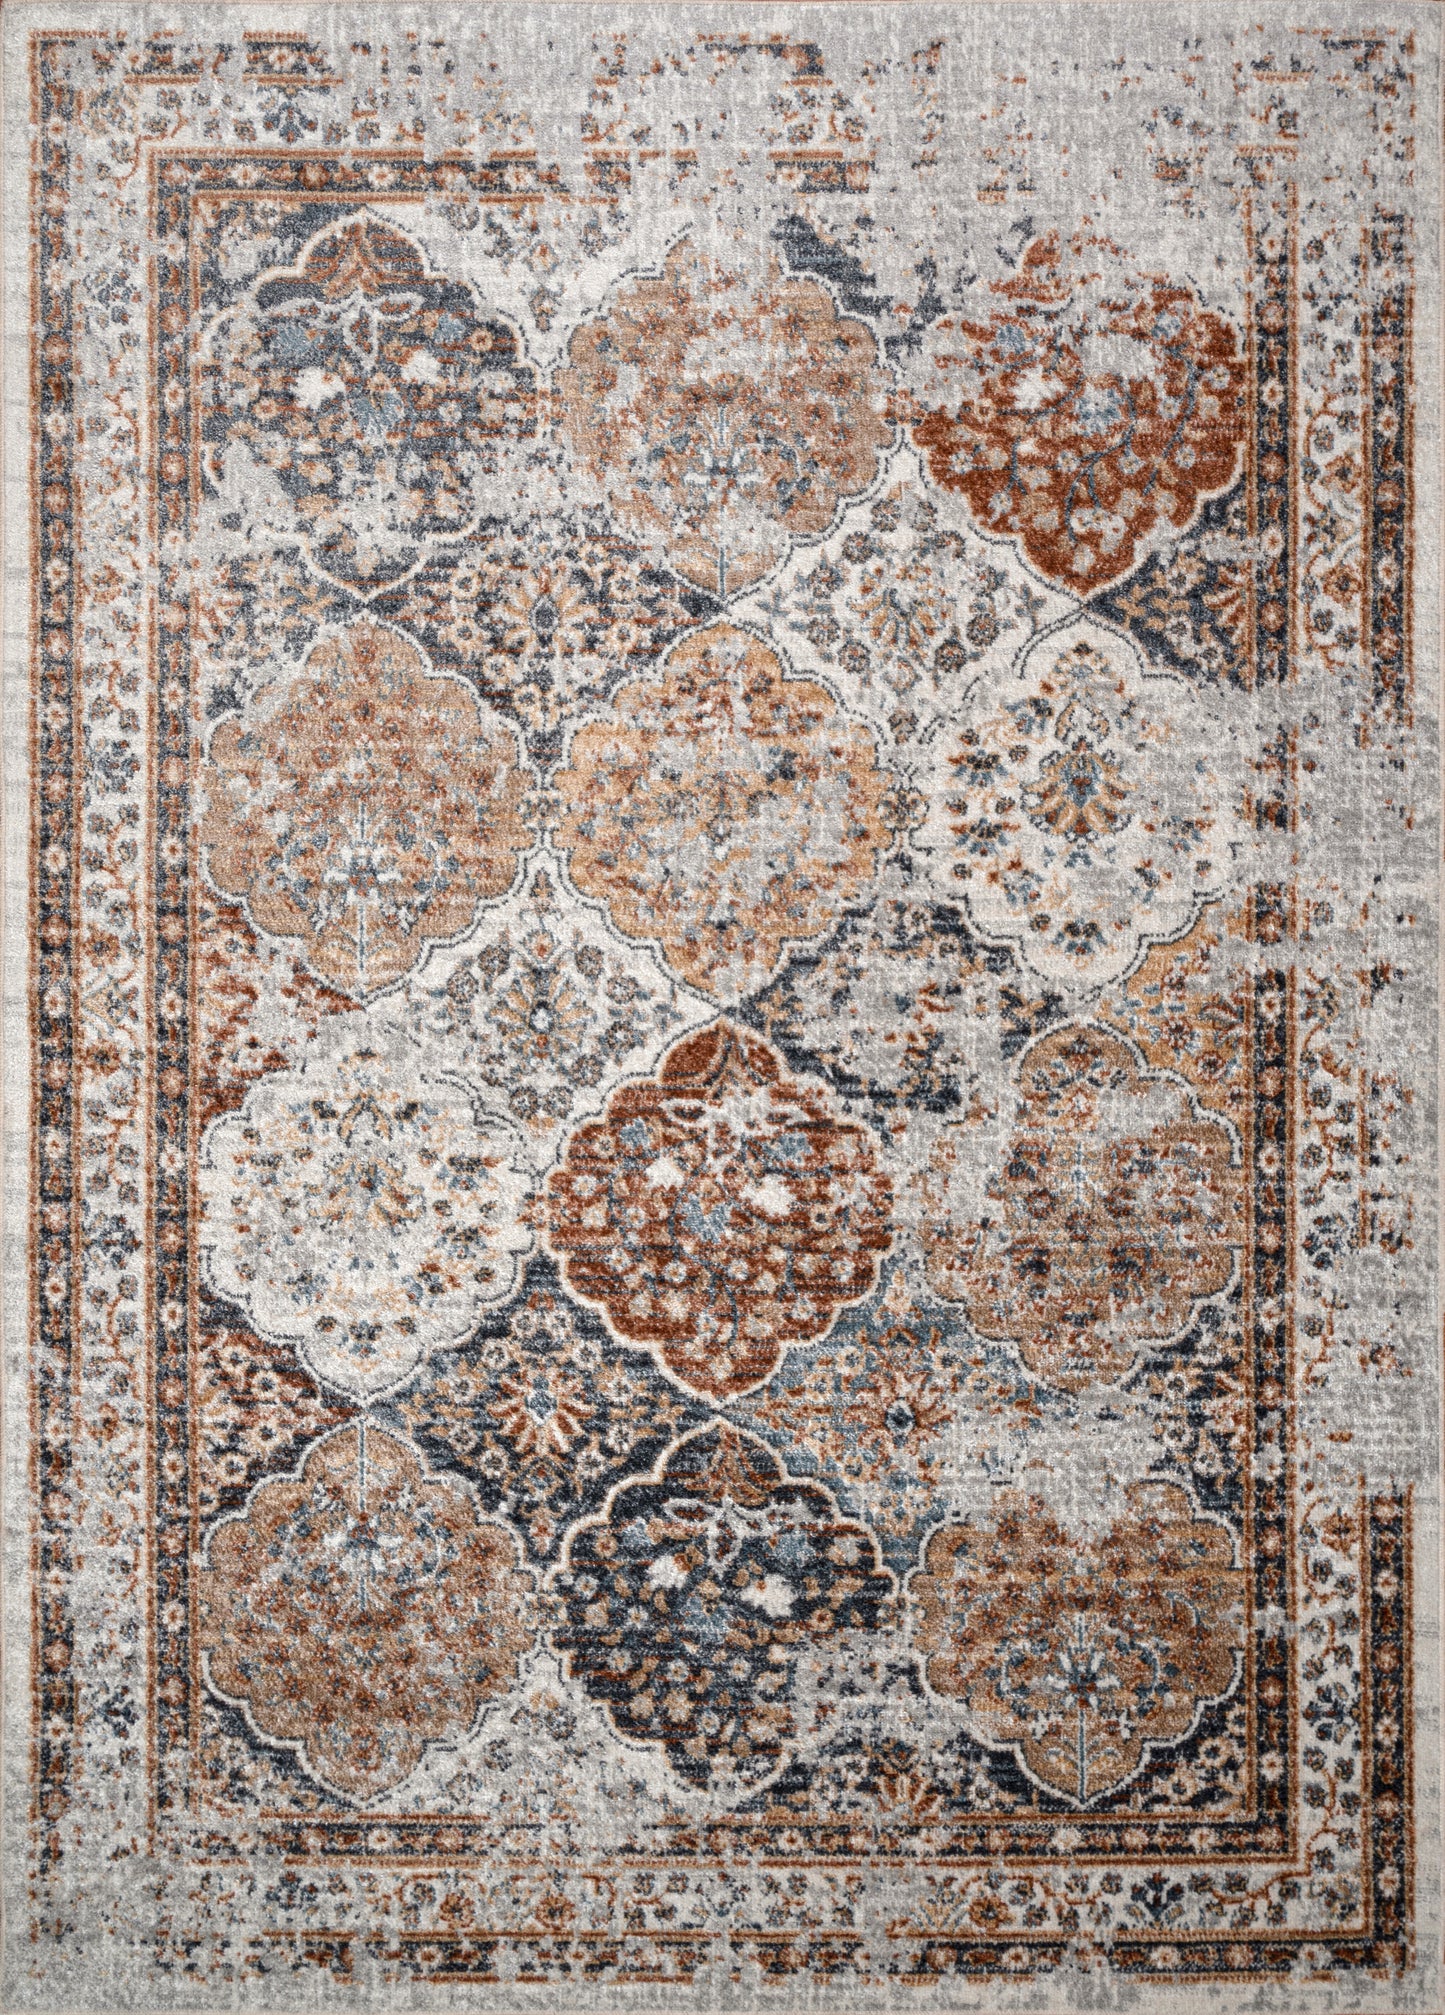 blue brown machine washable boho traditional area rug for living room bedroom 2x5, 3x5 Runner Rug, Entry Way, Entrance, Balcony, Bedside, Home Office, Table Top